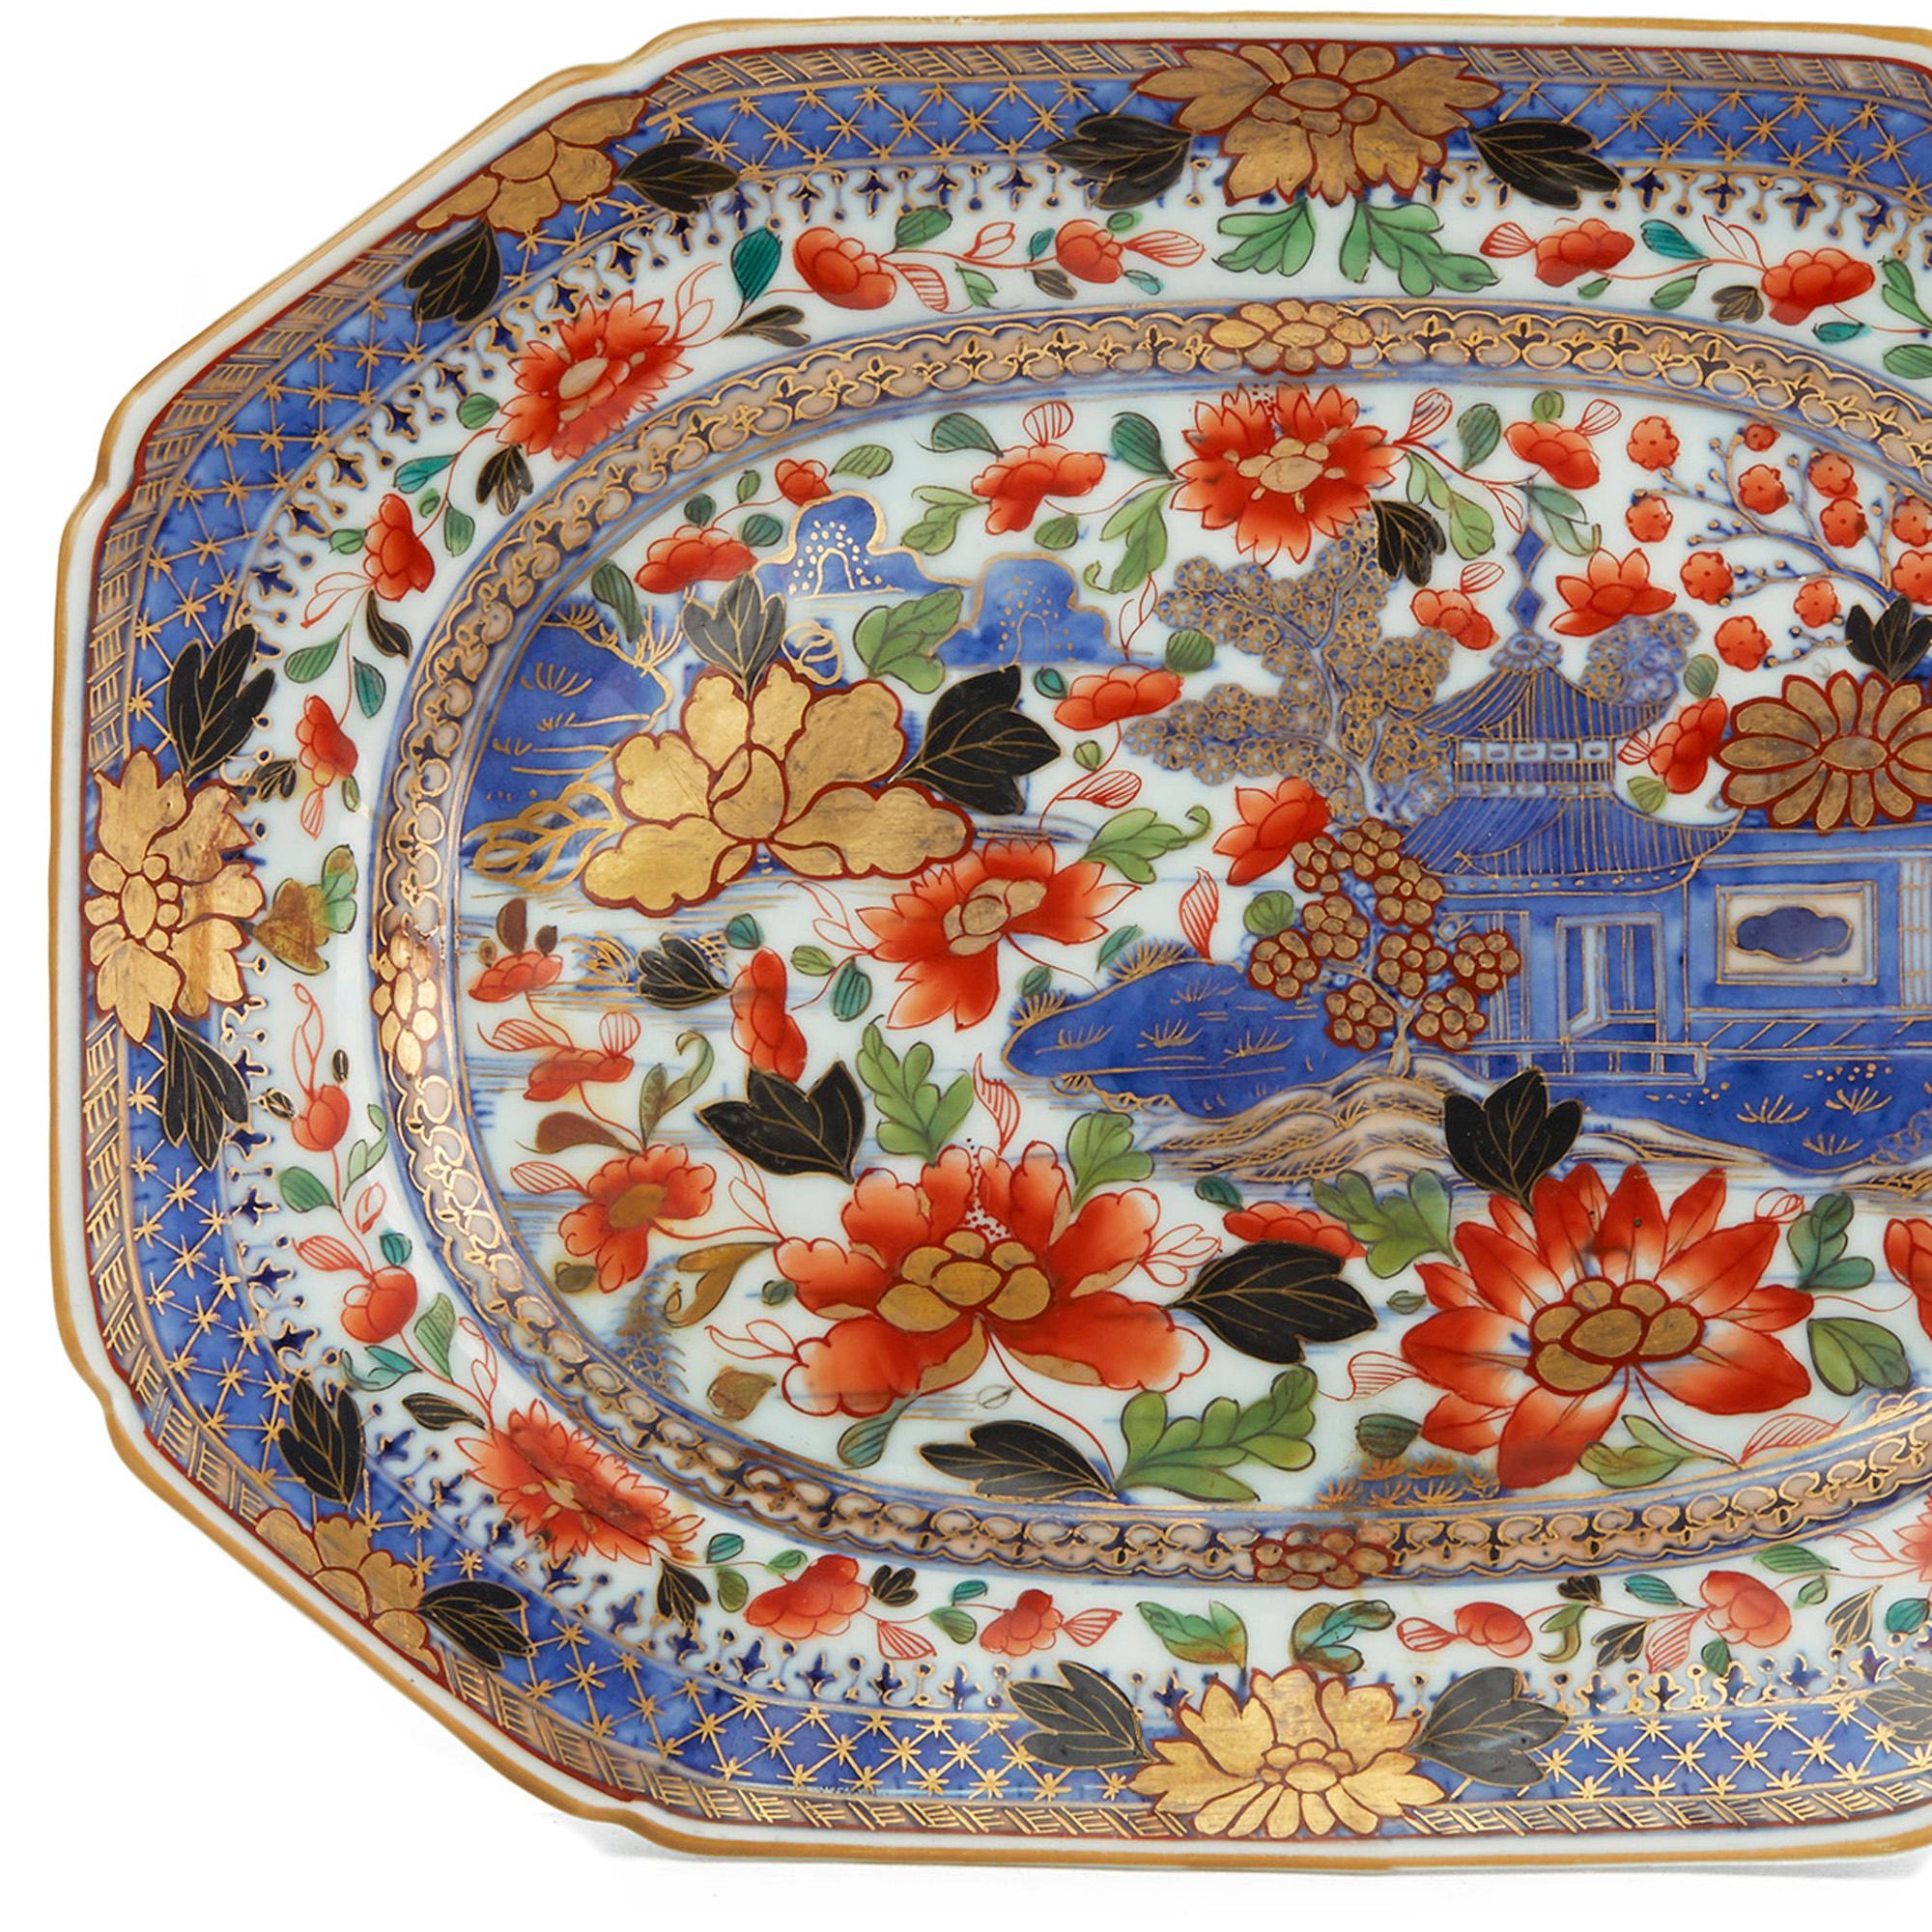 Hand-Painted Exceptional Chinese Qianlong Porcelain Overpainted Serving Dish, circa 1760